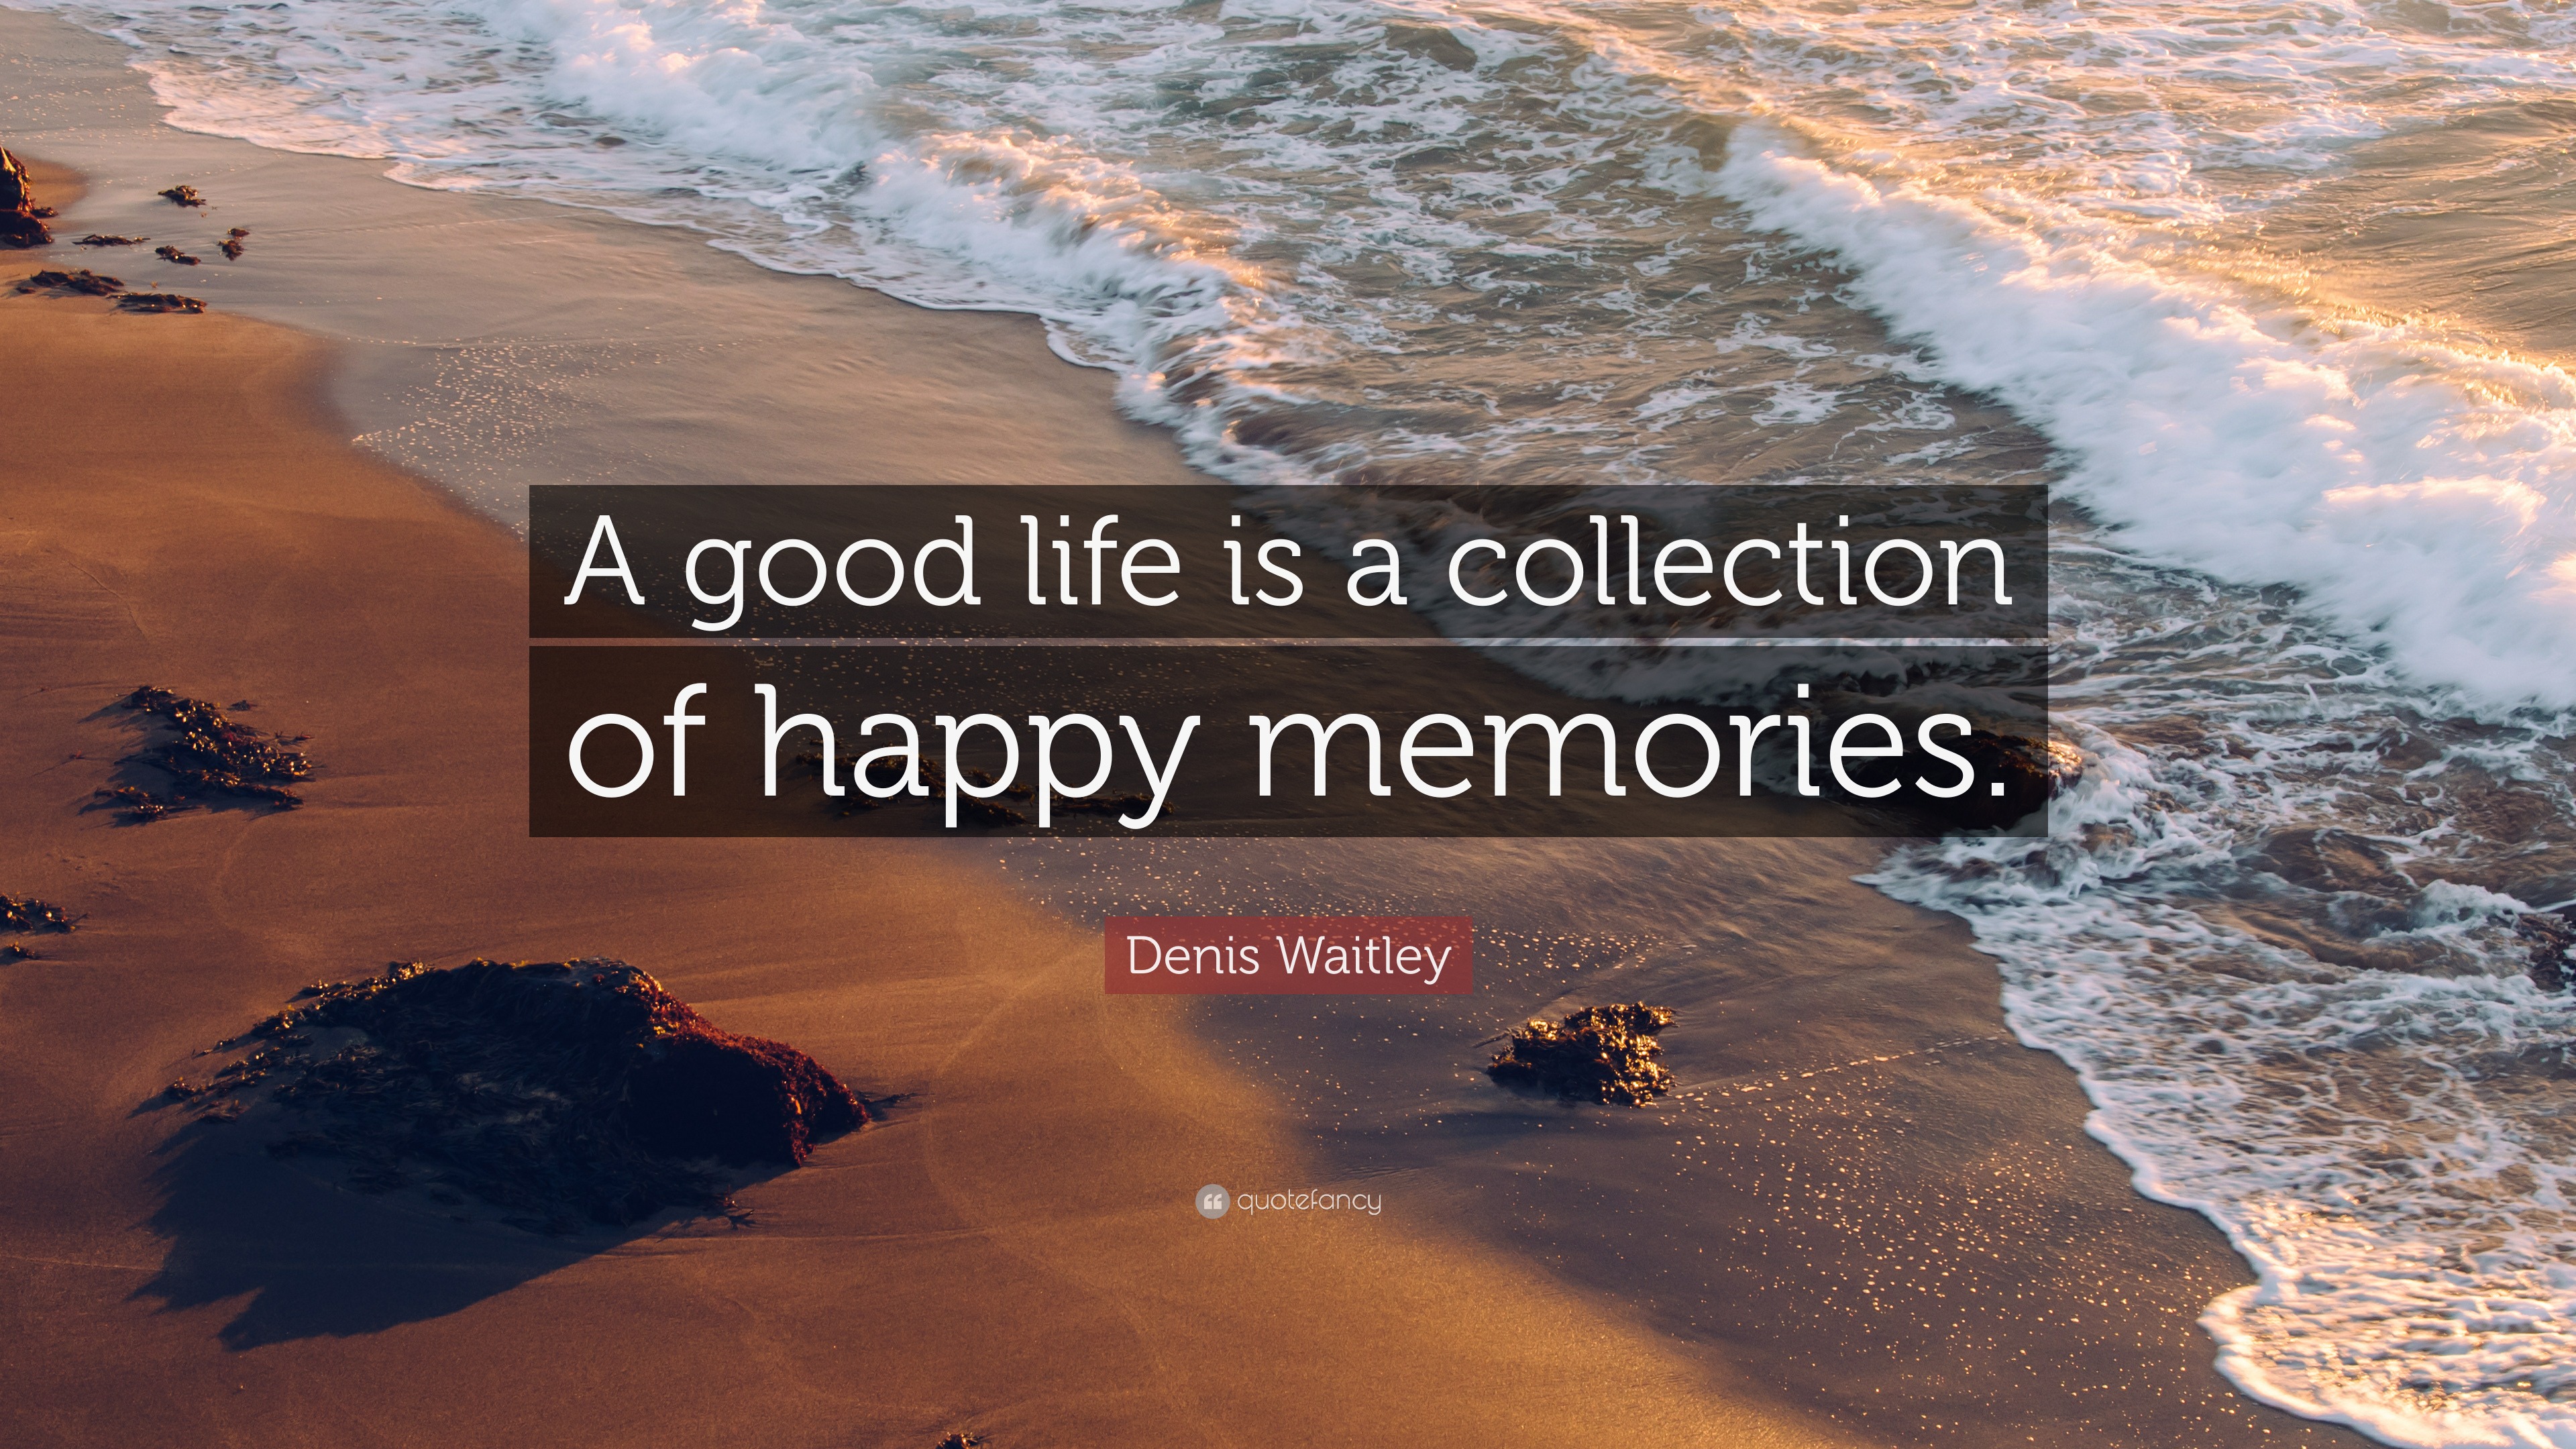 Denis Waitley Quote “A good life is a collection of happy memories.”